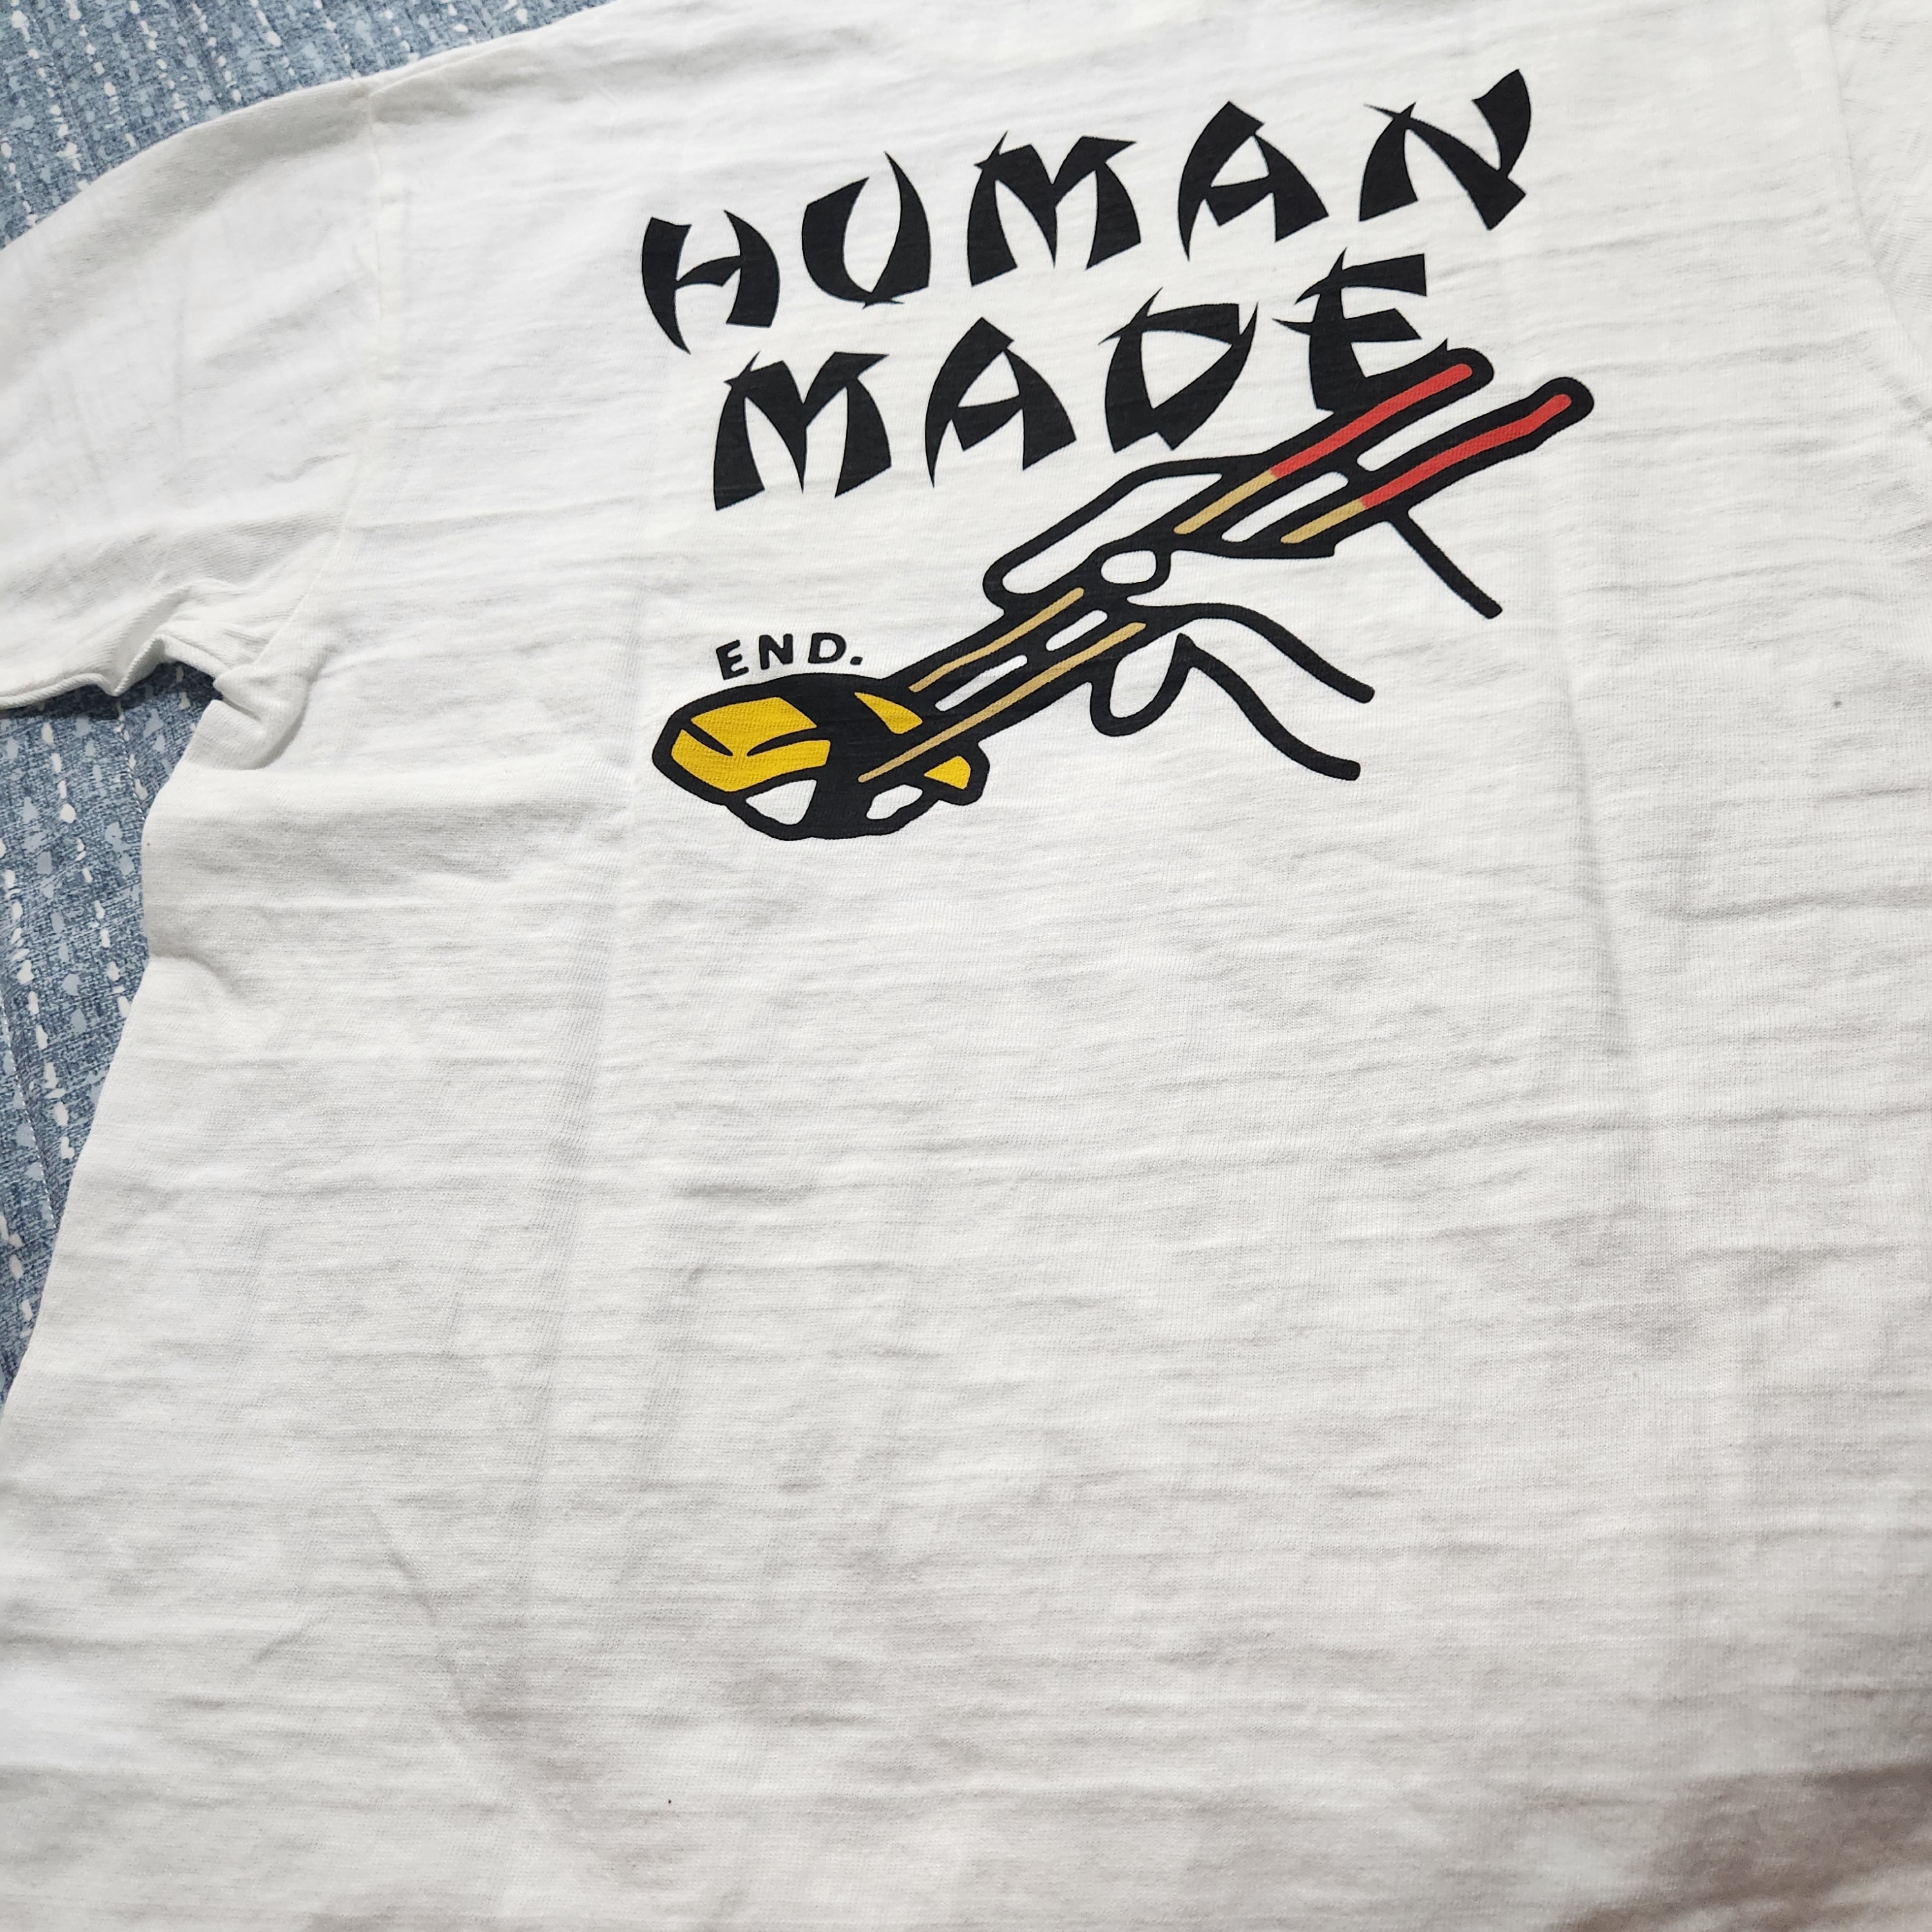 【24H限定】HUMAN MADE x END. Sushi Tシャツ　白　XLサイズ トップス